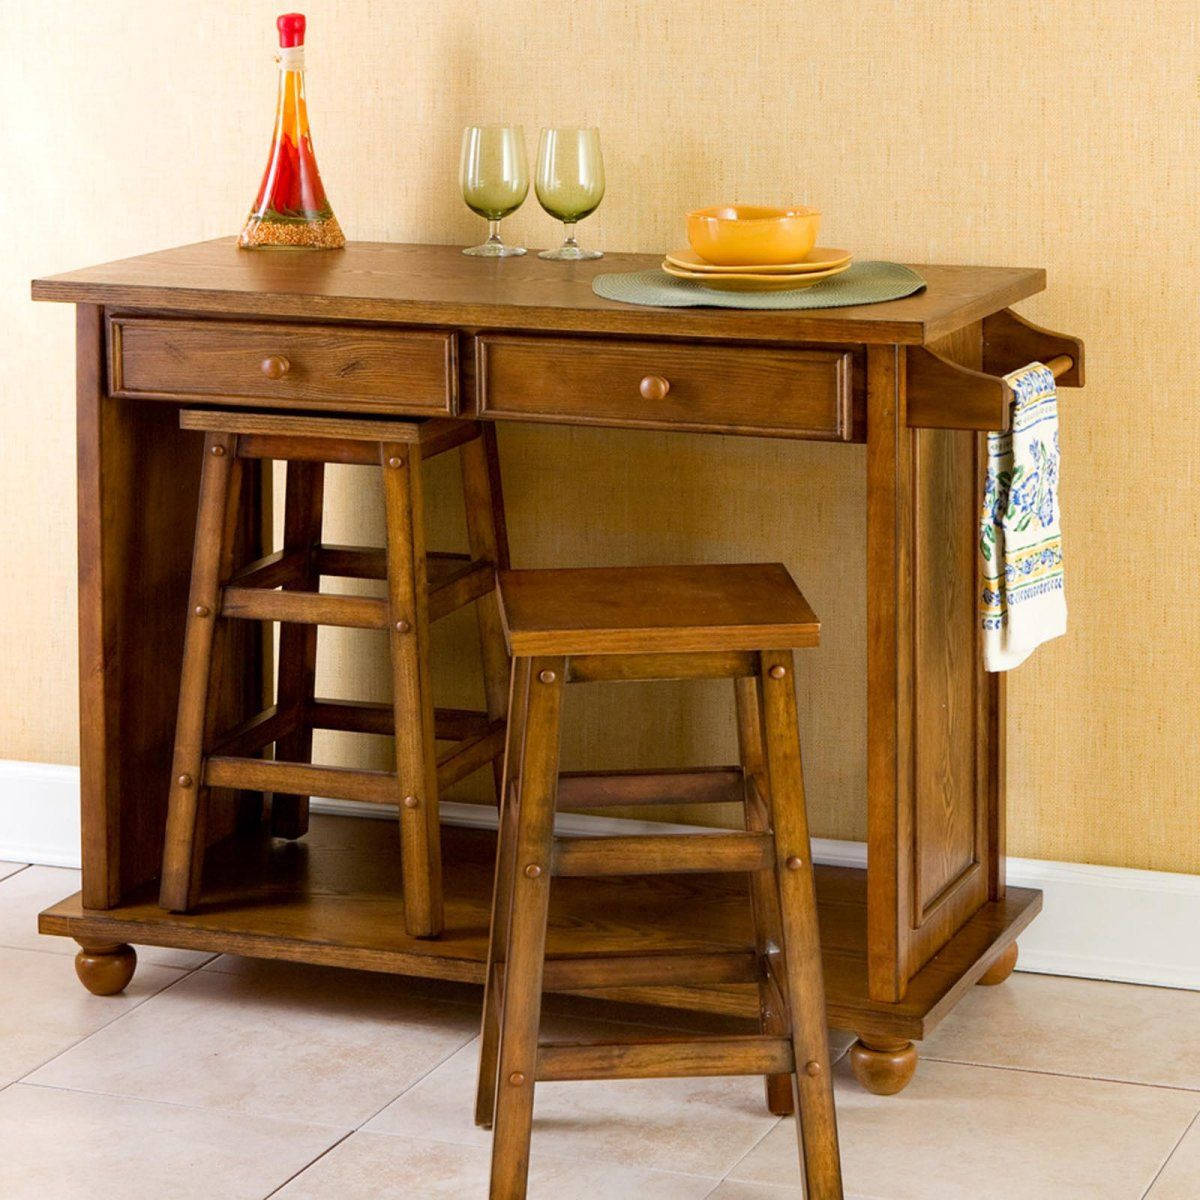 Small Kitchen Table With Stools
 Small kitchen Here s a space saving solution